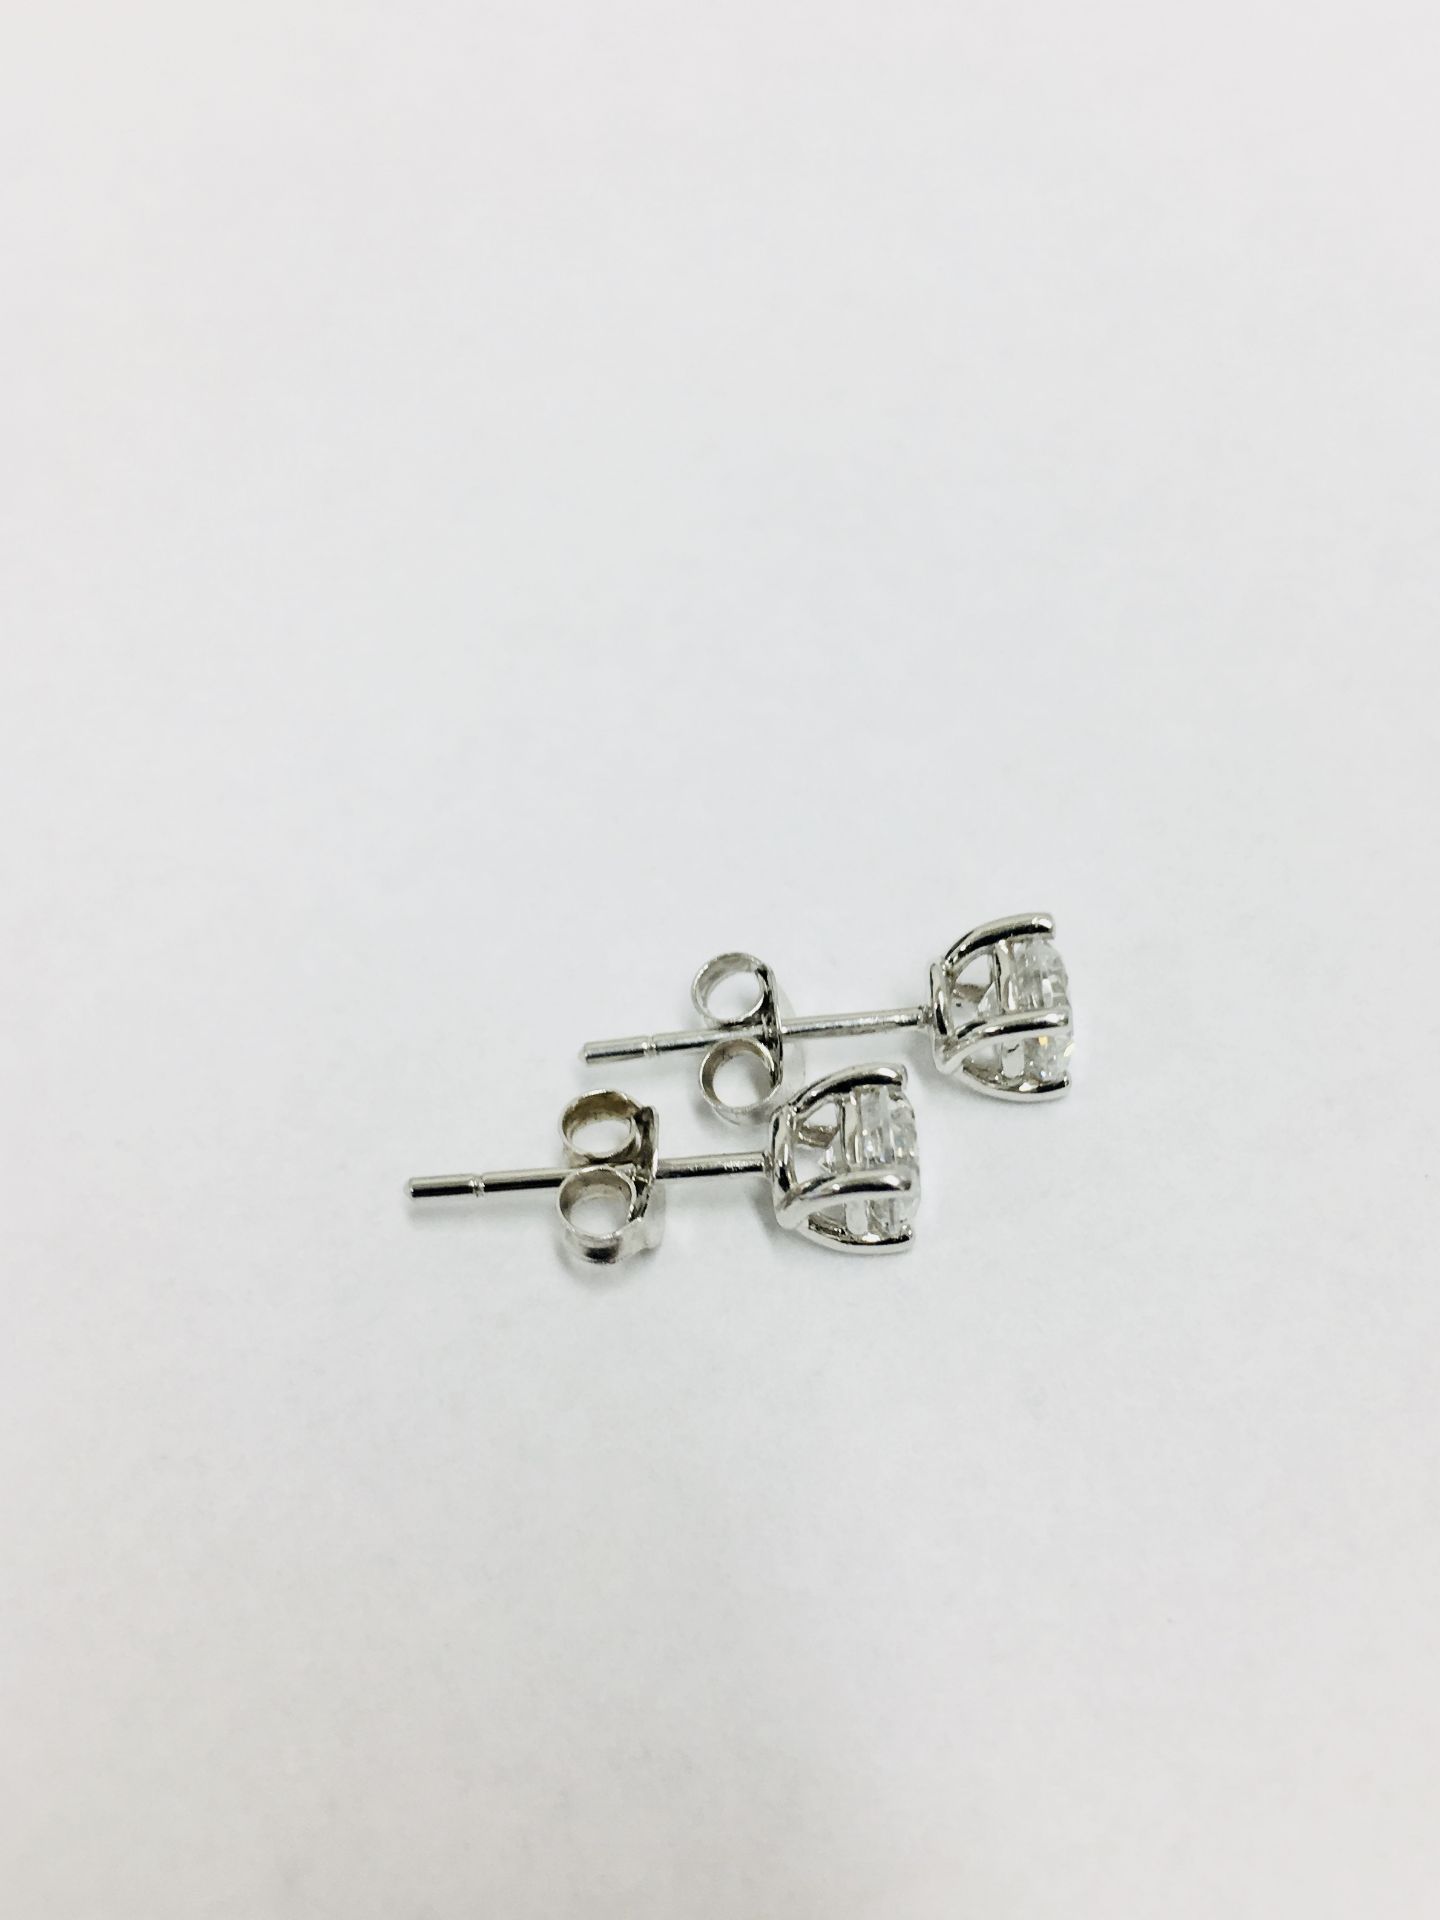 1.00Ct Diamond Solitaire Earrings Set In Platinum. - Image 7 of 15